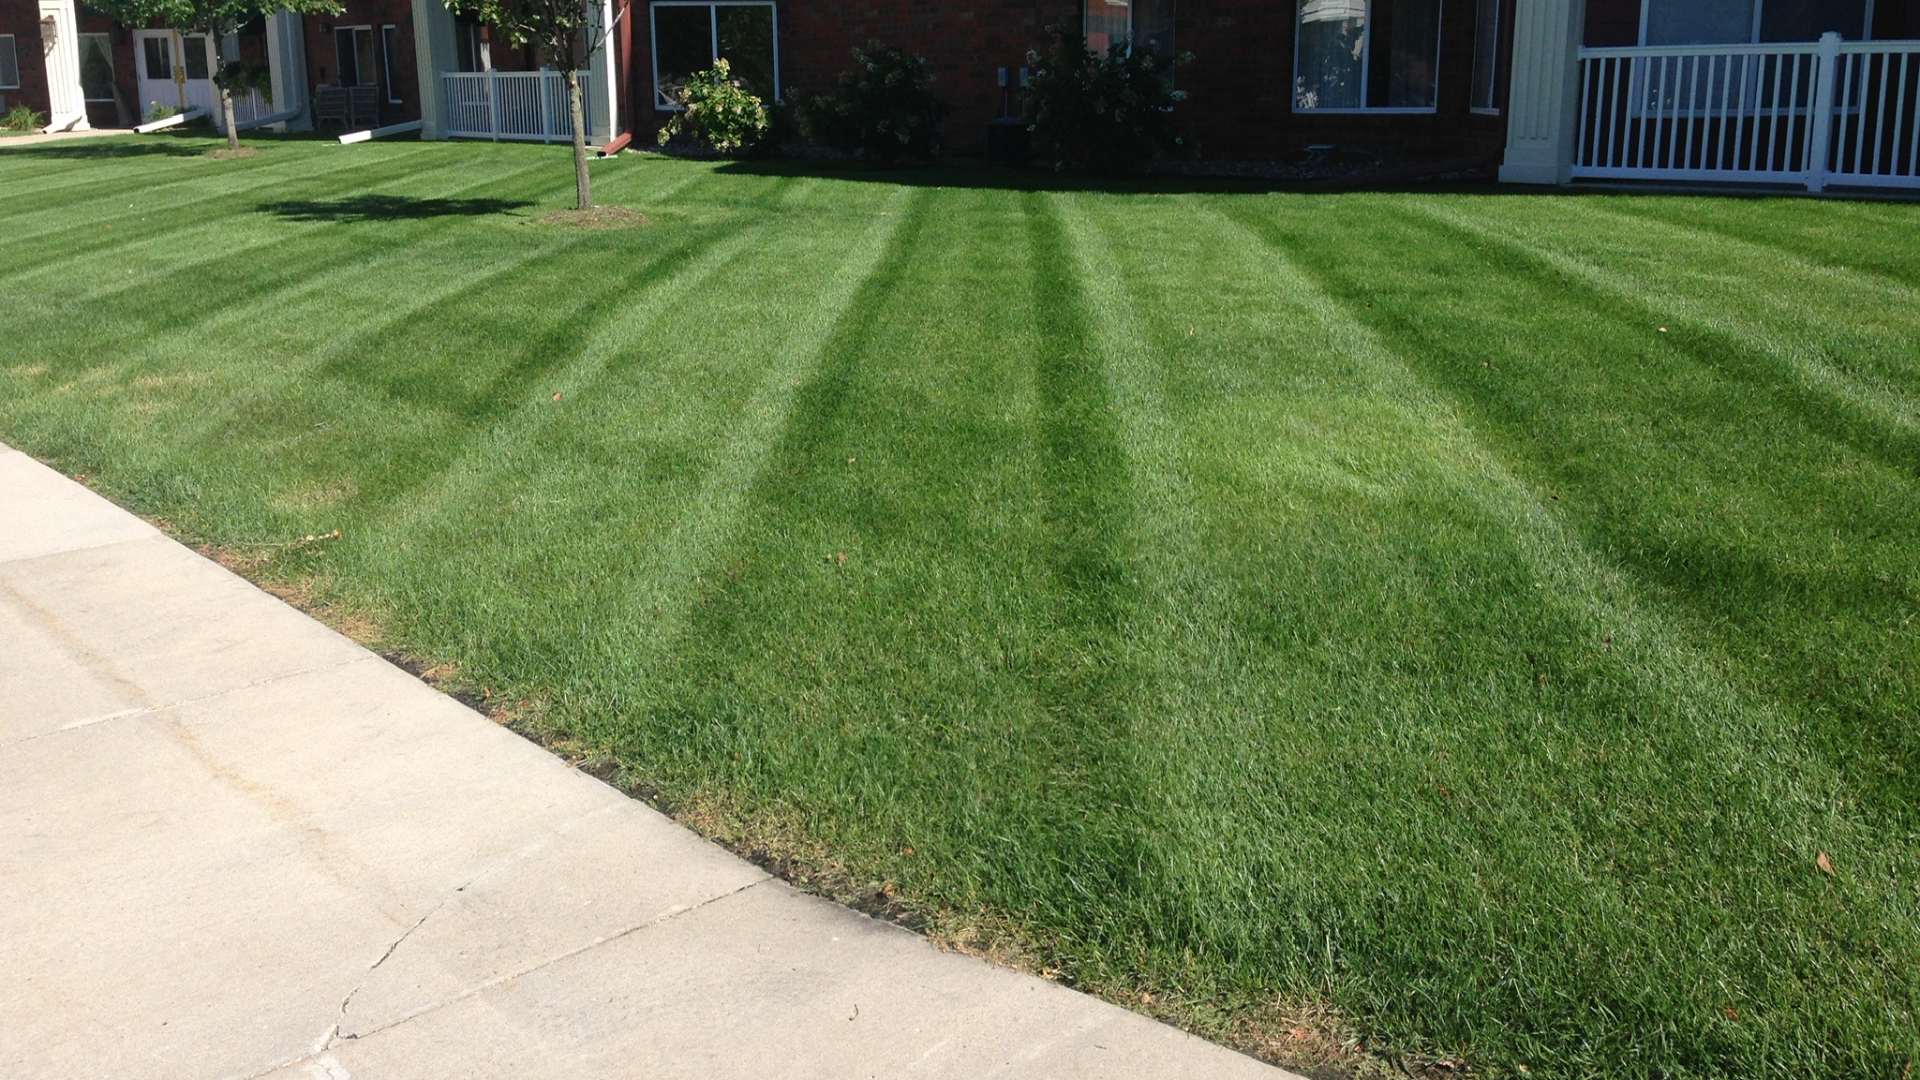 Mowed lawn with patterns beside a complex in Grimes, IA.